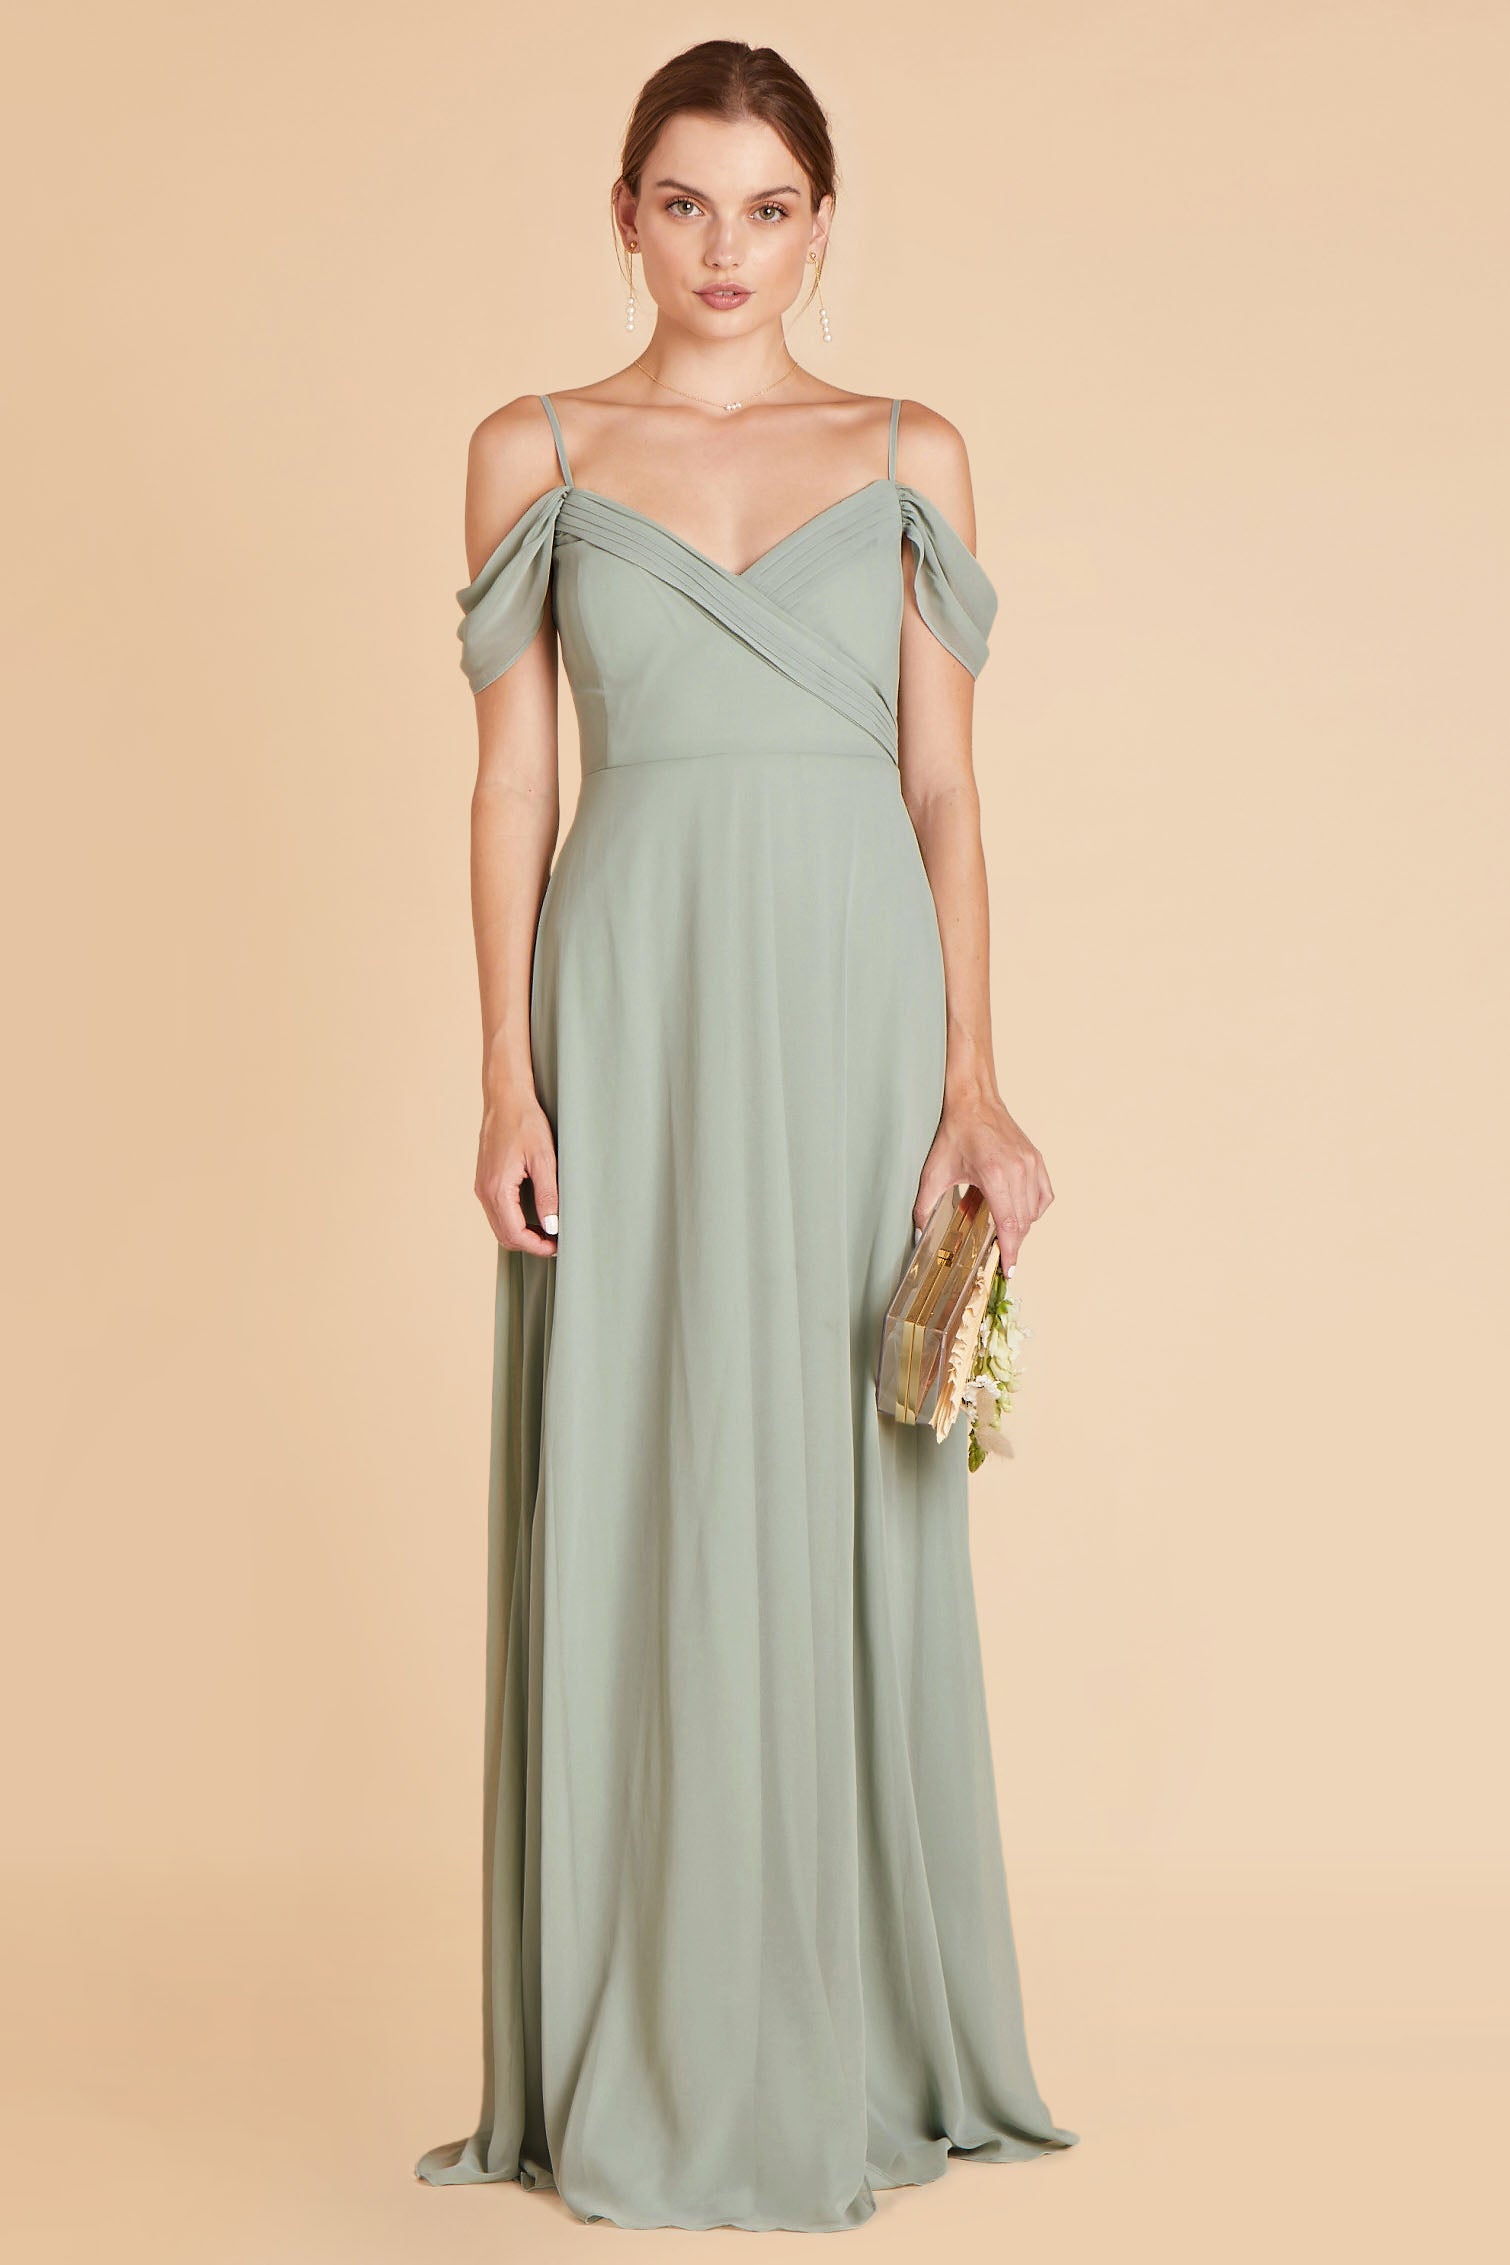 Spence convertible bridesmaid dress in sage green chiffon by Birdy Grey, front view